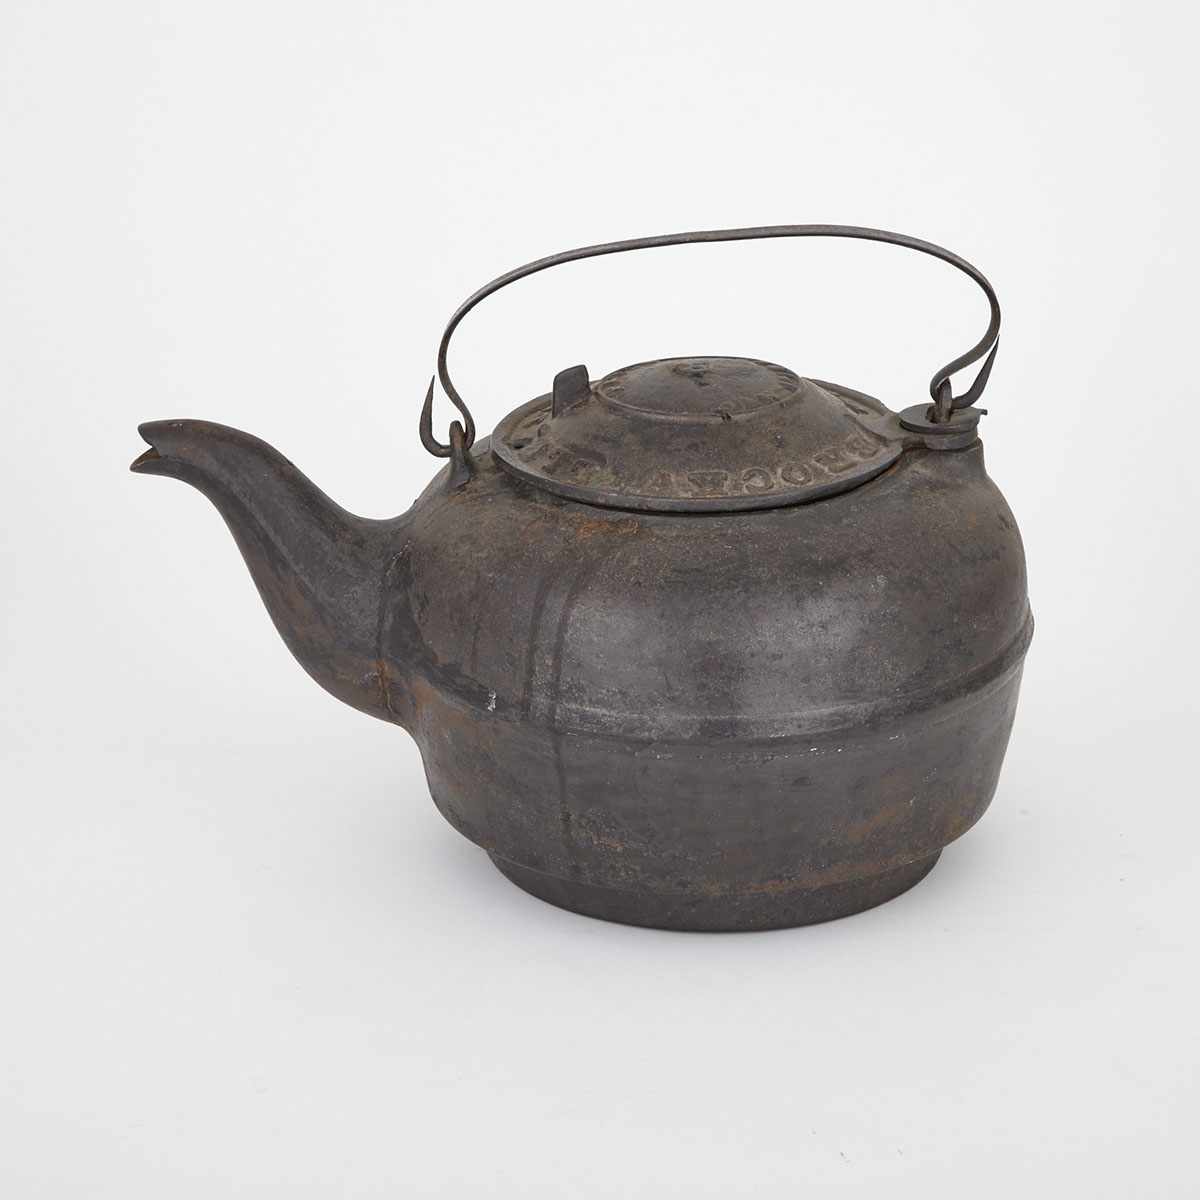 Large Ontario Cast and Wrought Iron Kettle, James Smart, Brockville, Ontario, 19th century